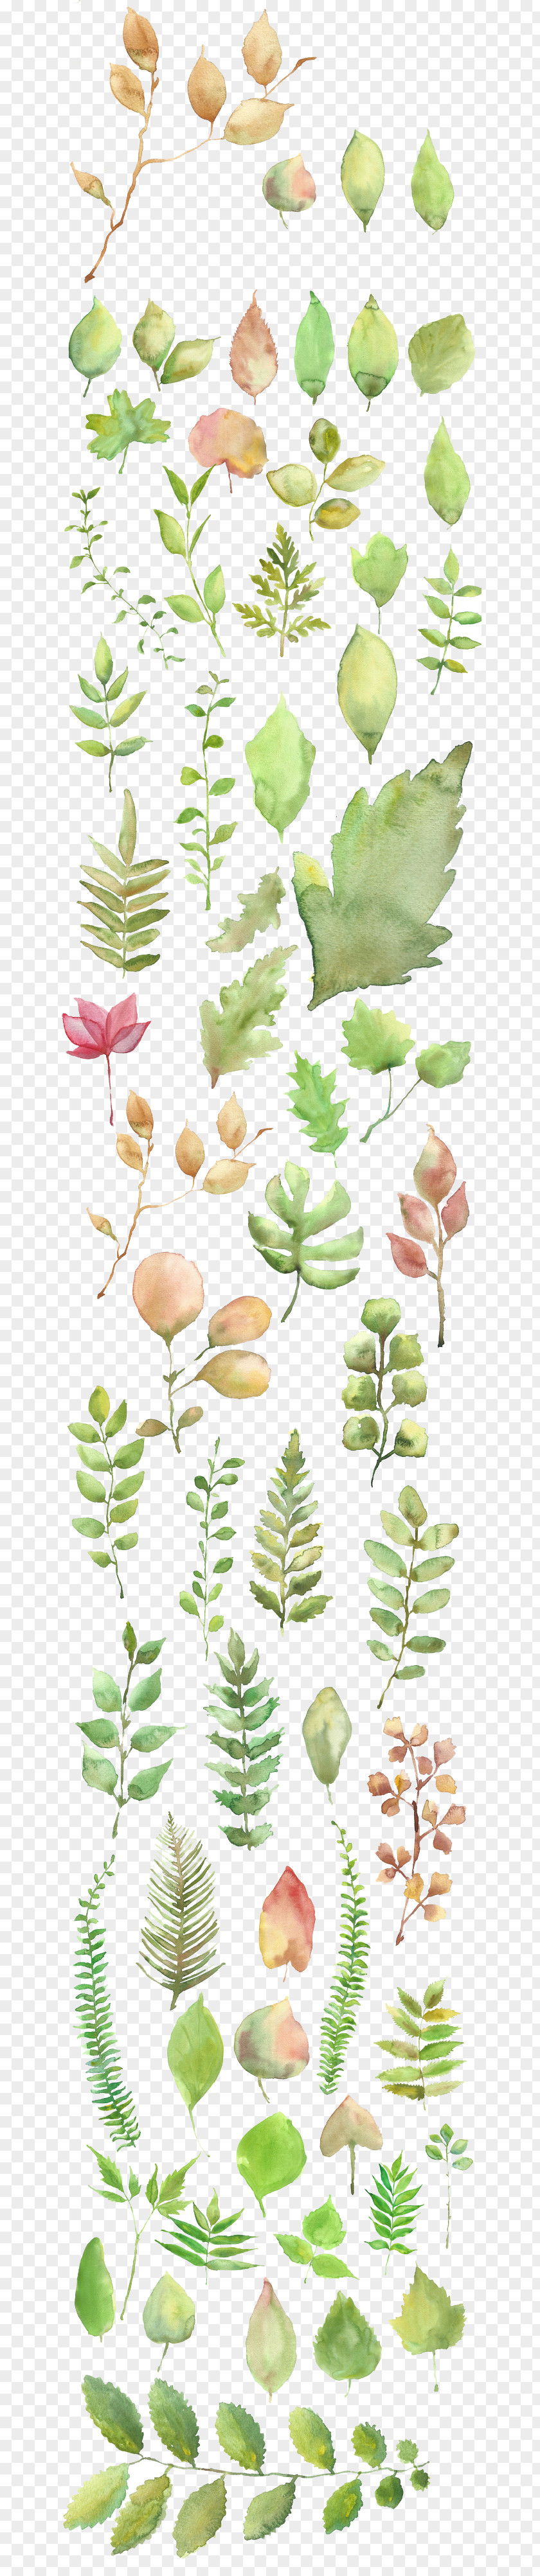 Watercolor Leaves Shading Material Painting PNG